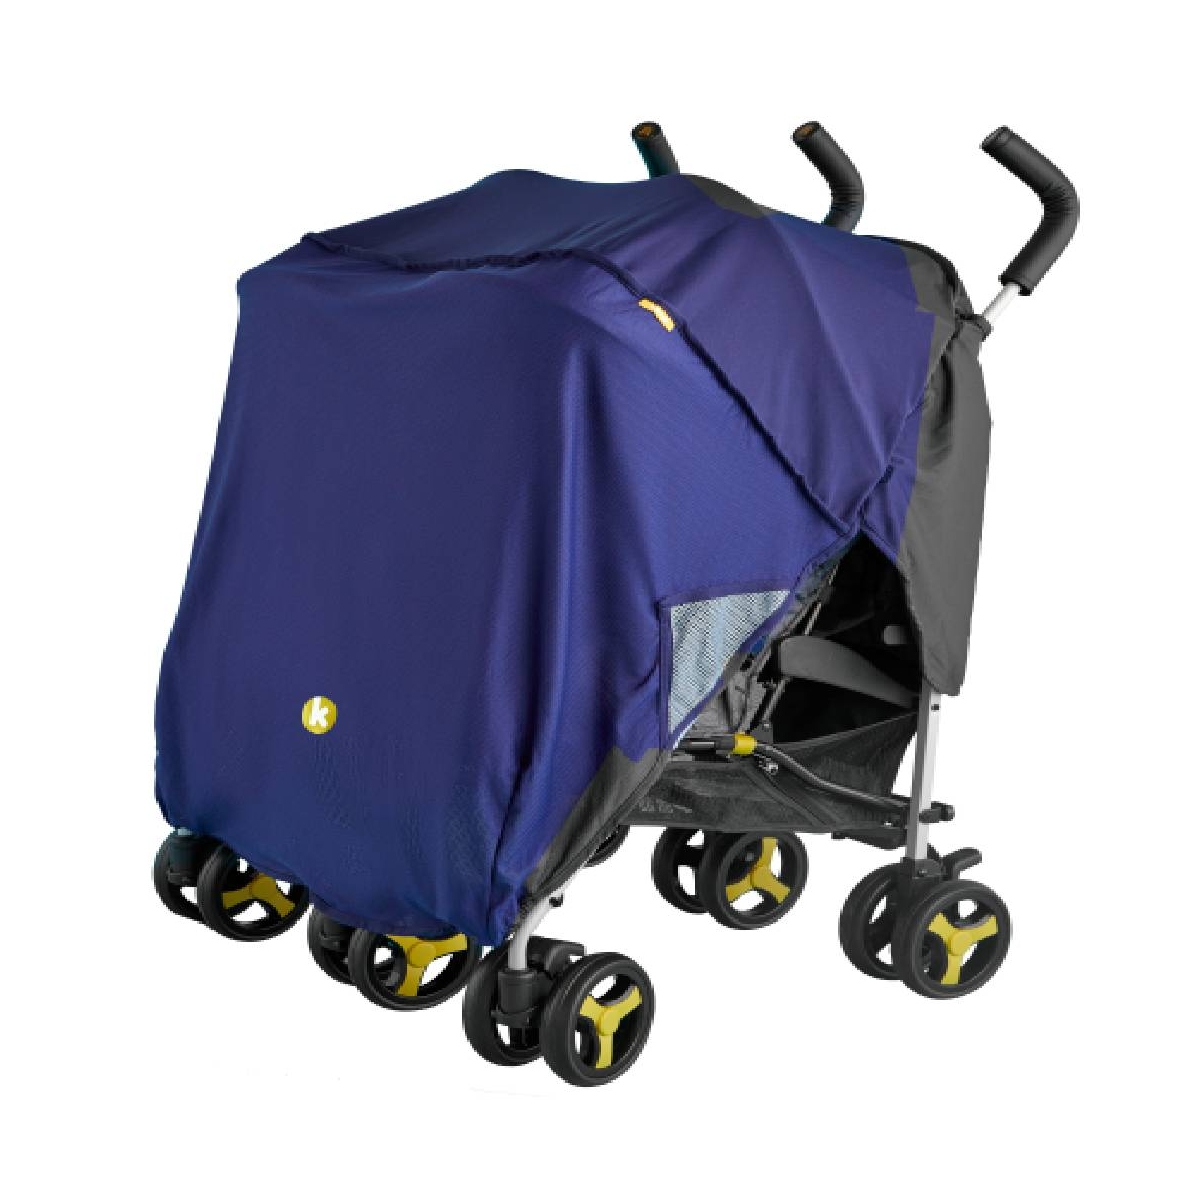 The Real Sunshady Universal Double Stroller Cover